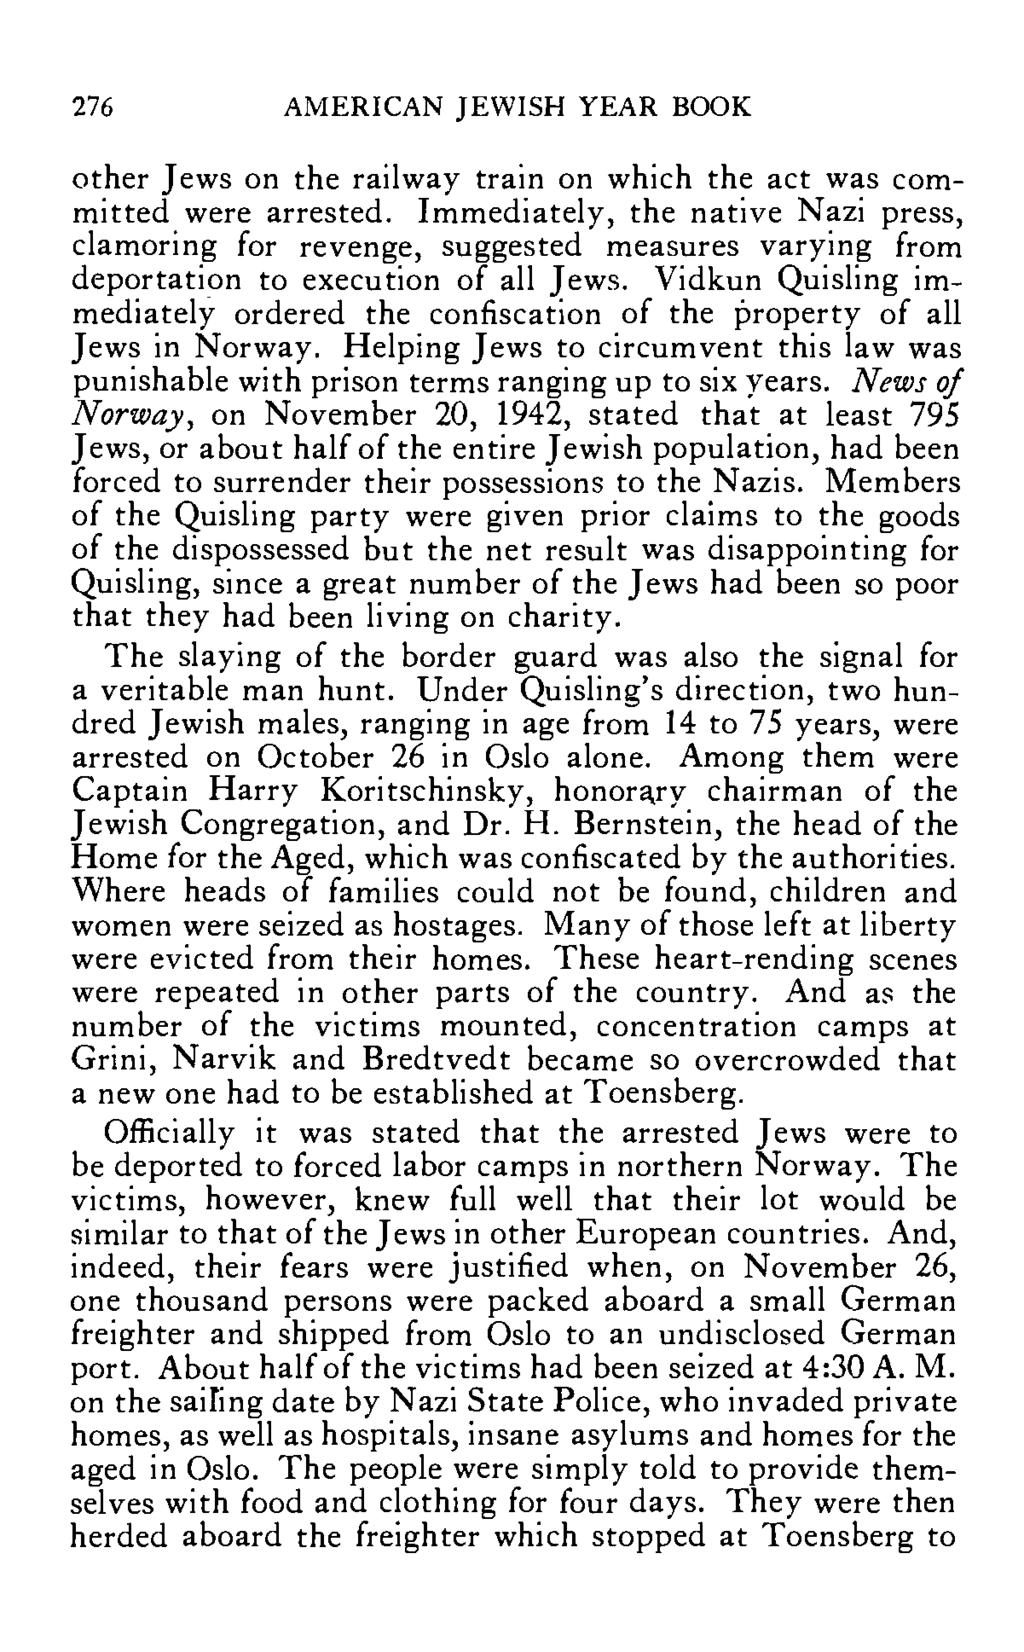 276 AMERICAN JEWISH YEAR BOOK other Jews on the railway train on which the act was committed were arrested.